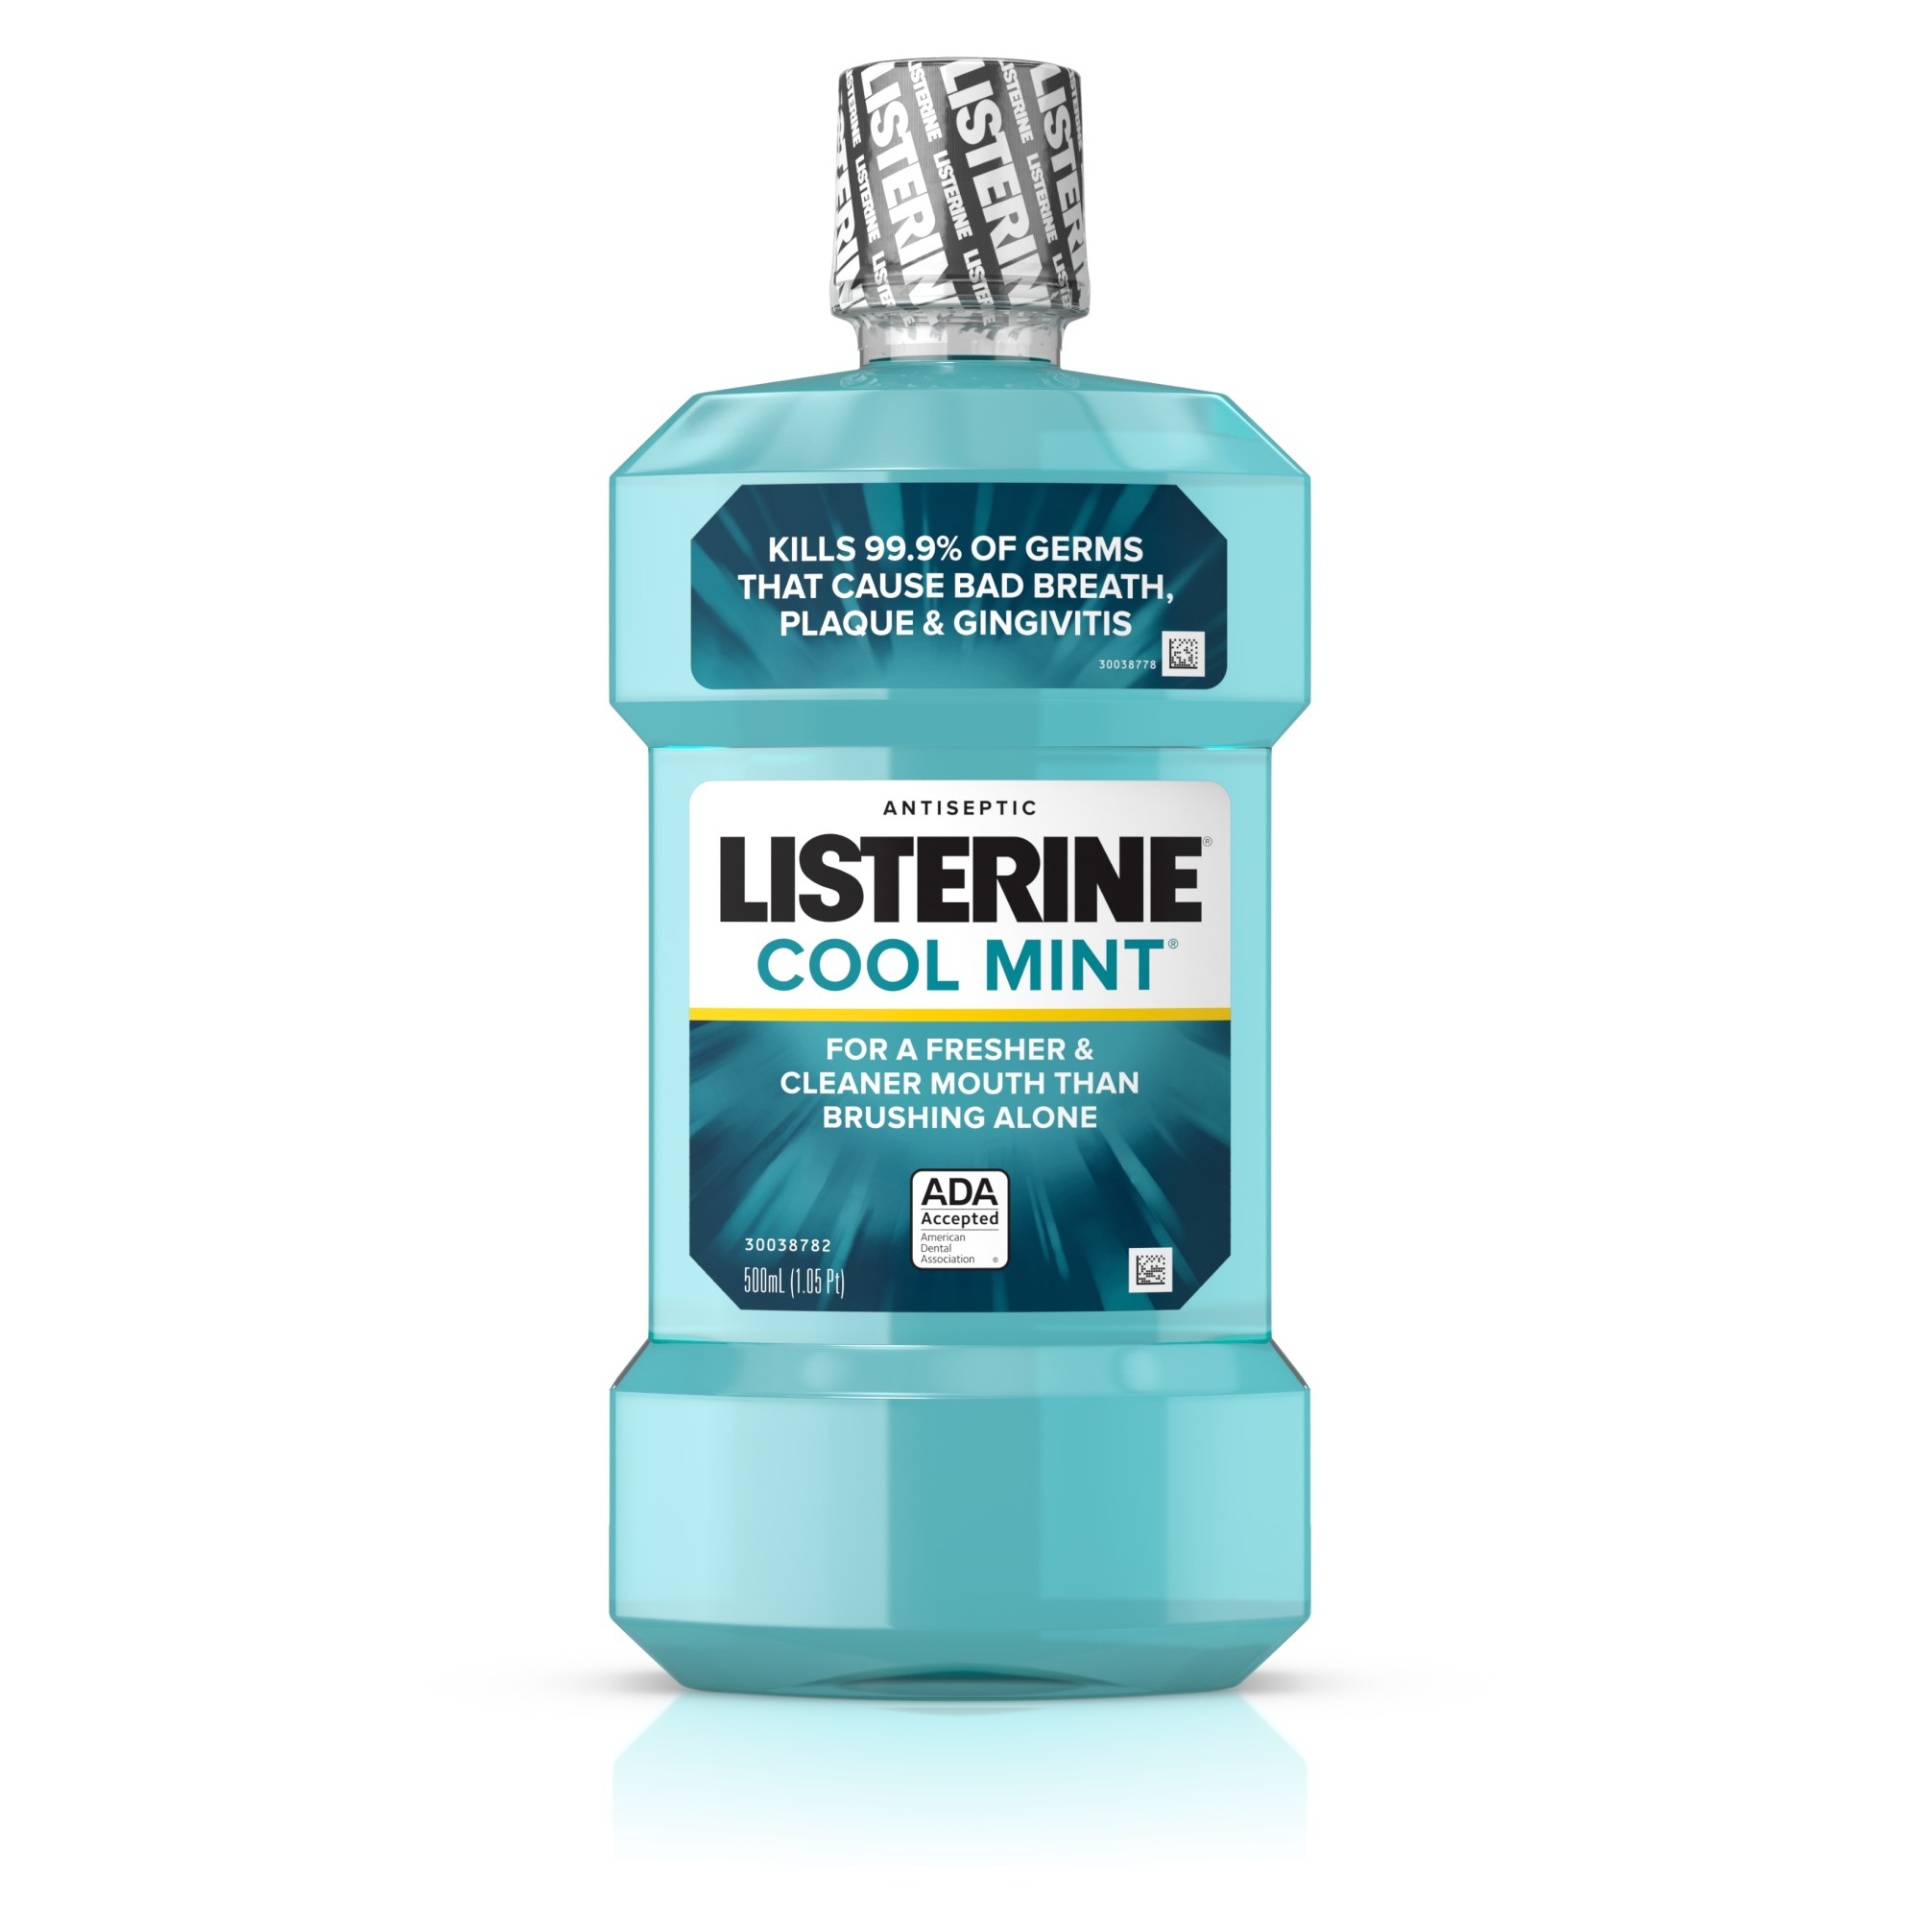 slide 1 of 6, Listerine Cool Mint Antiseptic Oral Care Mouthwash to Kill 99% of Germs that Cause Bad Breath, Plaque and Gingivitis, ADA-Accepted Mouthwash, Cool Mint Flavored Oral Rinse, 16.9 oz